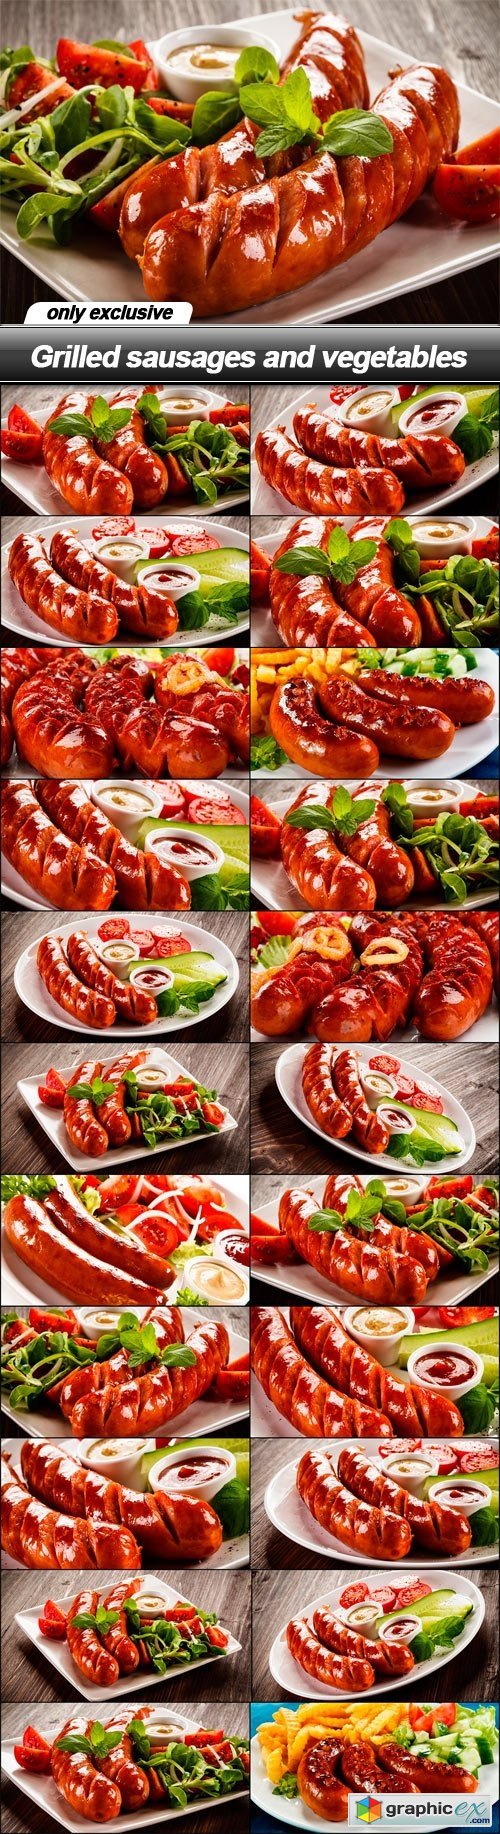 Grilled sausages and vegetables - 22 UHQ JPEG